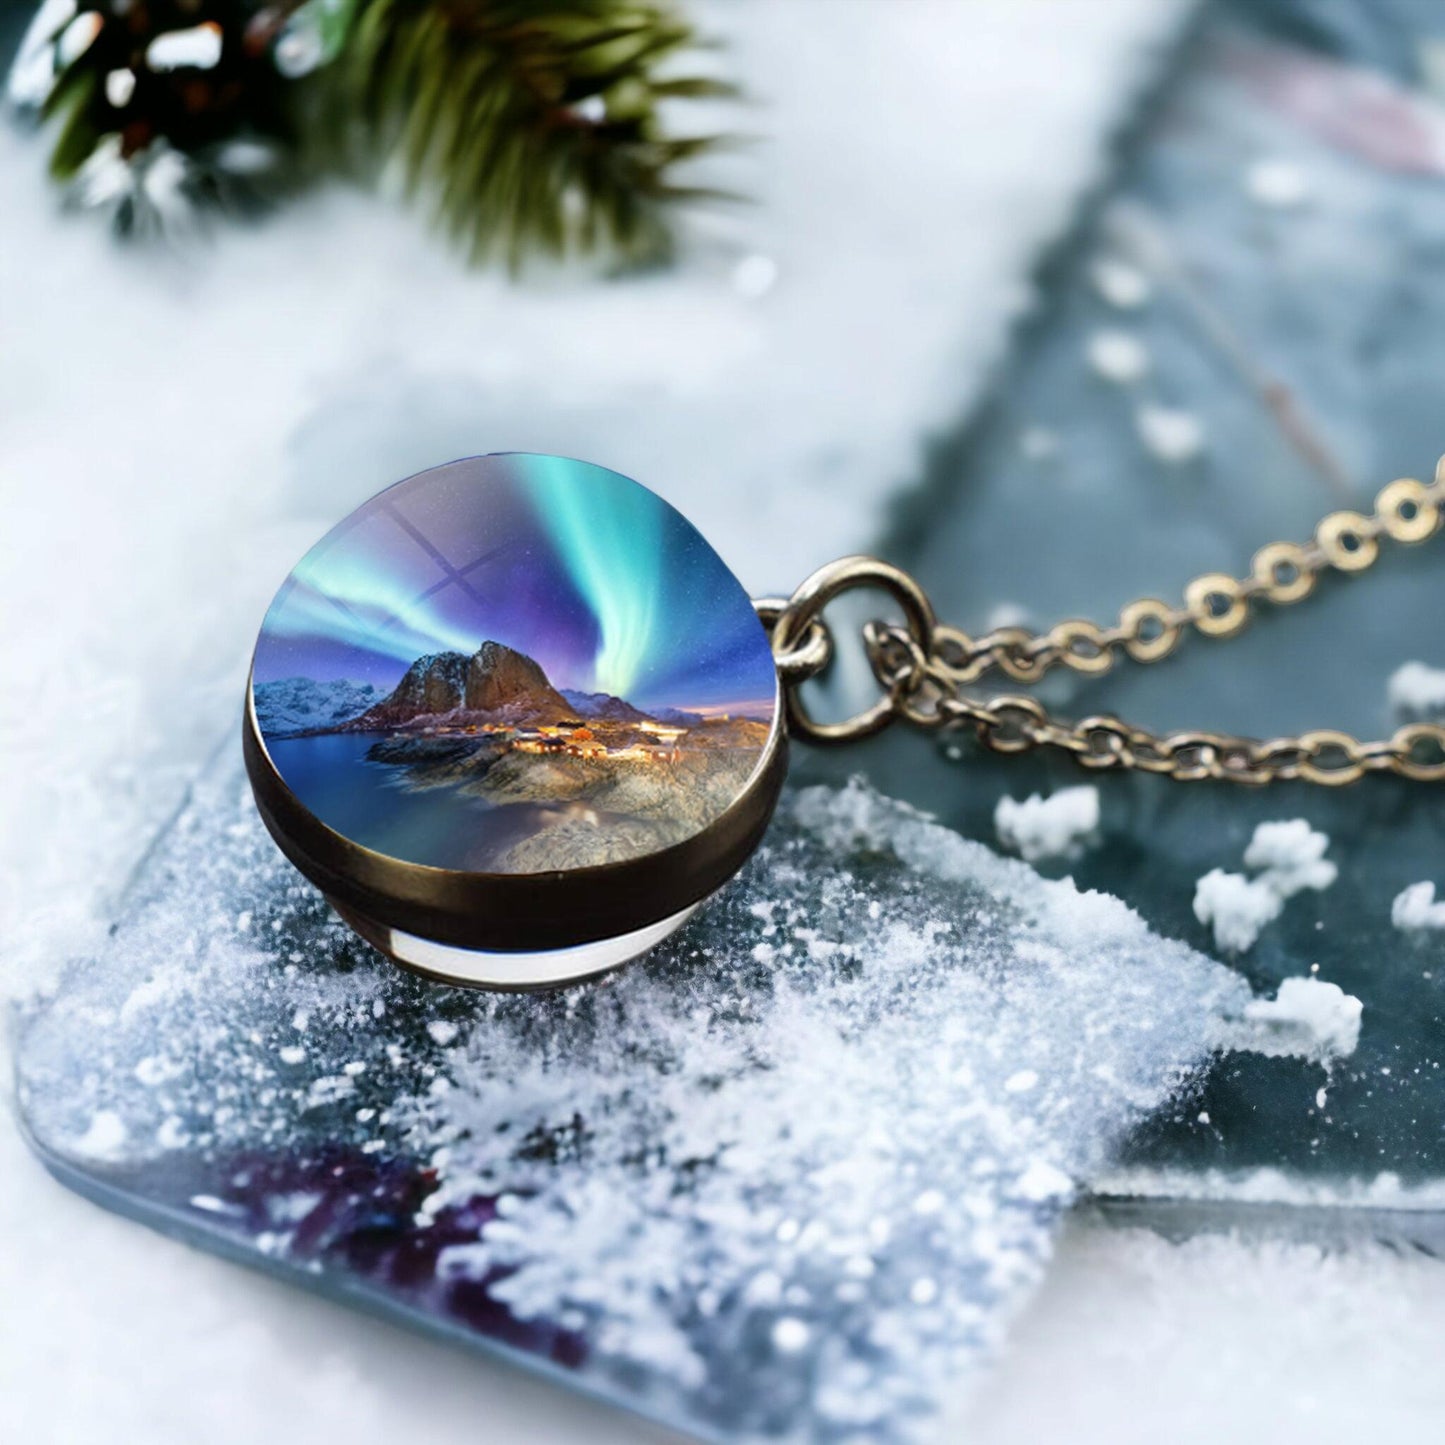 Unique Aurora Borealis Silver Necklace - Northern Light Jewelry - Double Side Glass Ball Pendent Necklace - Perfect Aurora Lovers Gift 12